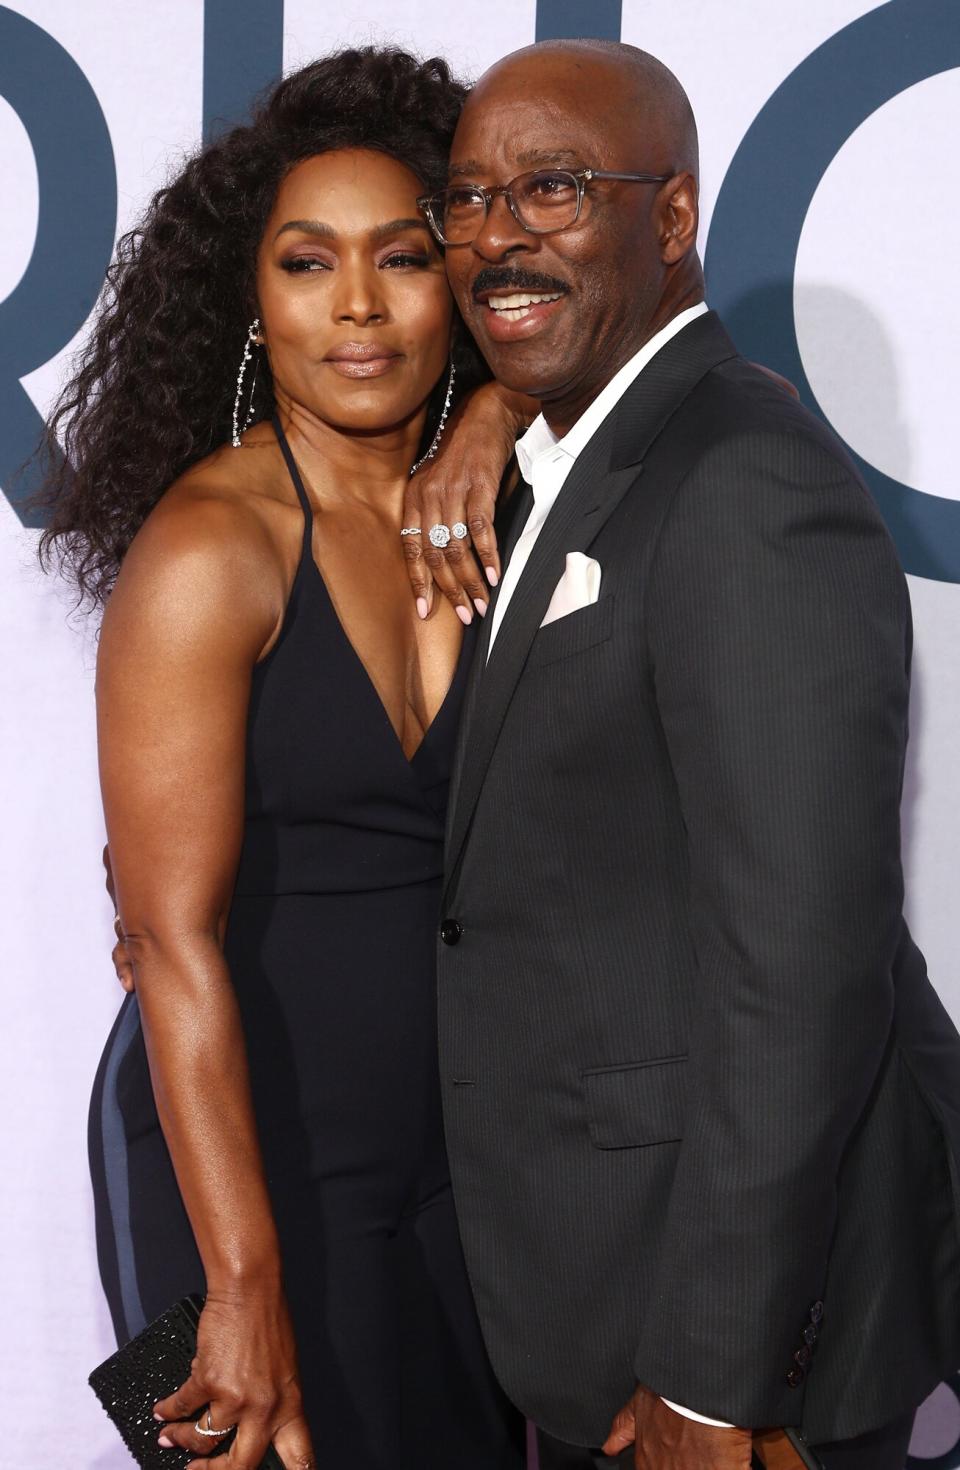 Angela Bassett and Courtney B. Vance attend the Netflix Premiere of OTHERHOOD at the Egyptian Theater on July 31, 2019 in Los Angeles, California